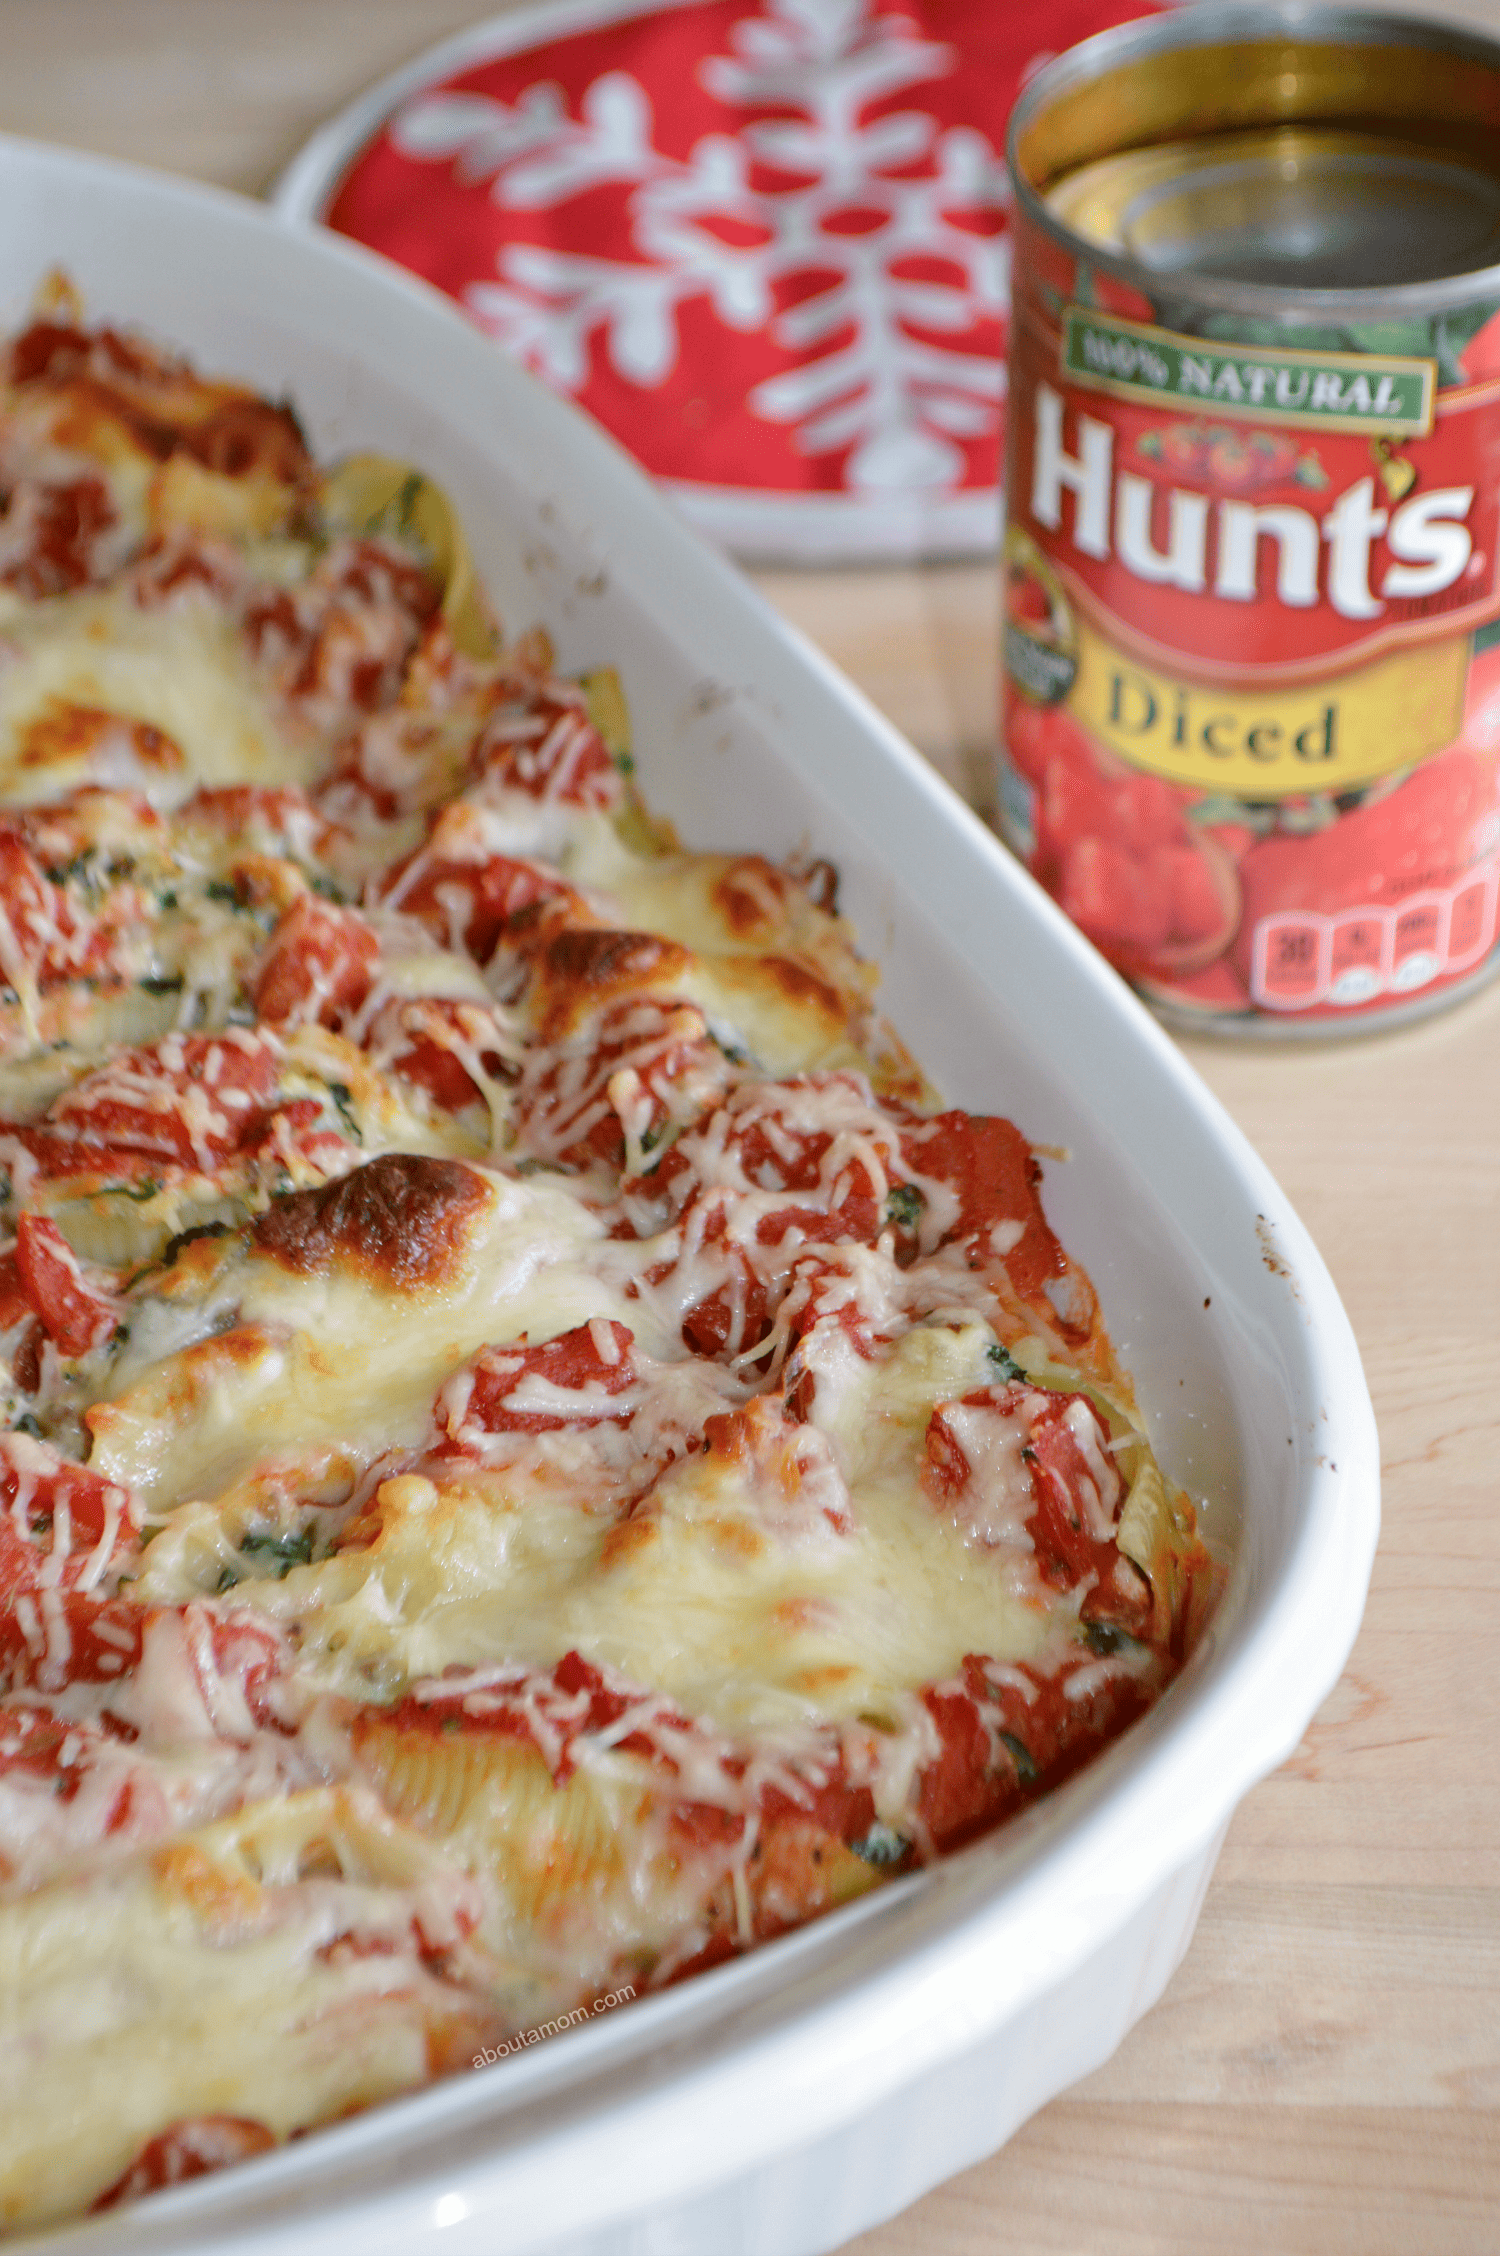 Italian Sausage, Spinach and Ricotta Stuffed Shells recipe. Jumbo pasta shells filled with a mixture of sweet Italian sausage, spinach and ricotta cheese. Smothered in a chunky red sauce and topped with Mozzarella and Parmesan cheeses. A worthy holiday recipe.